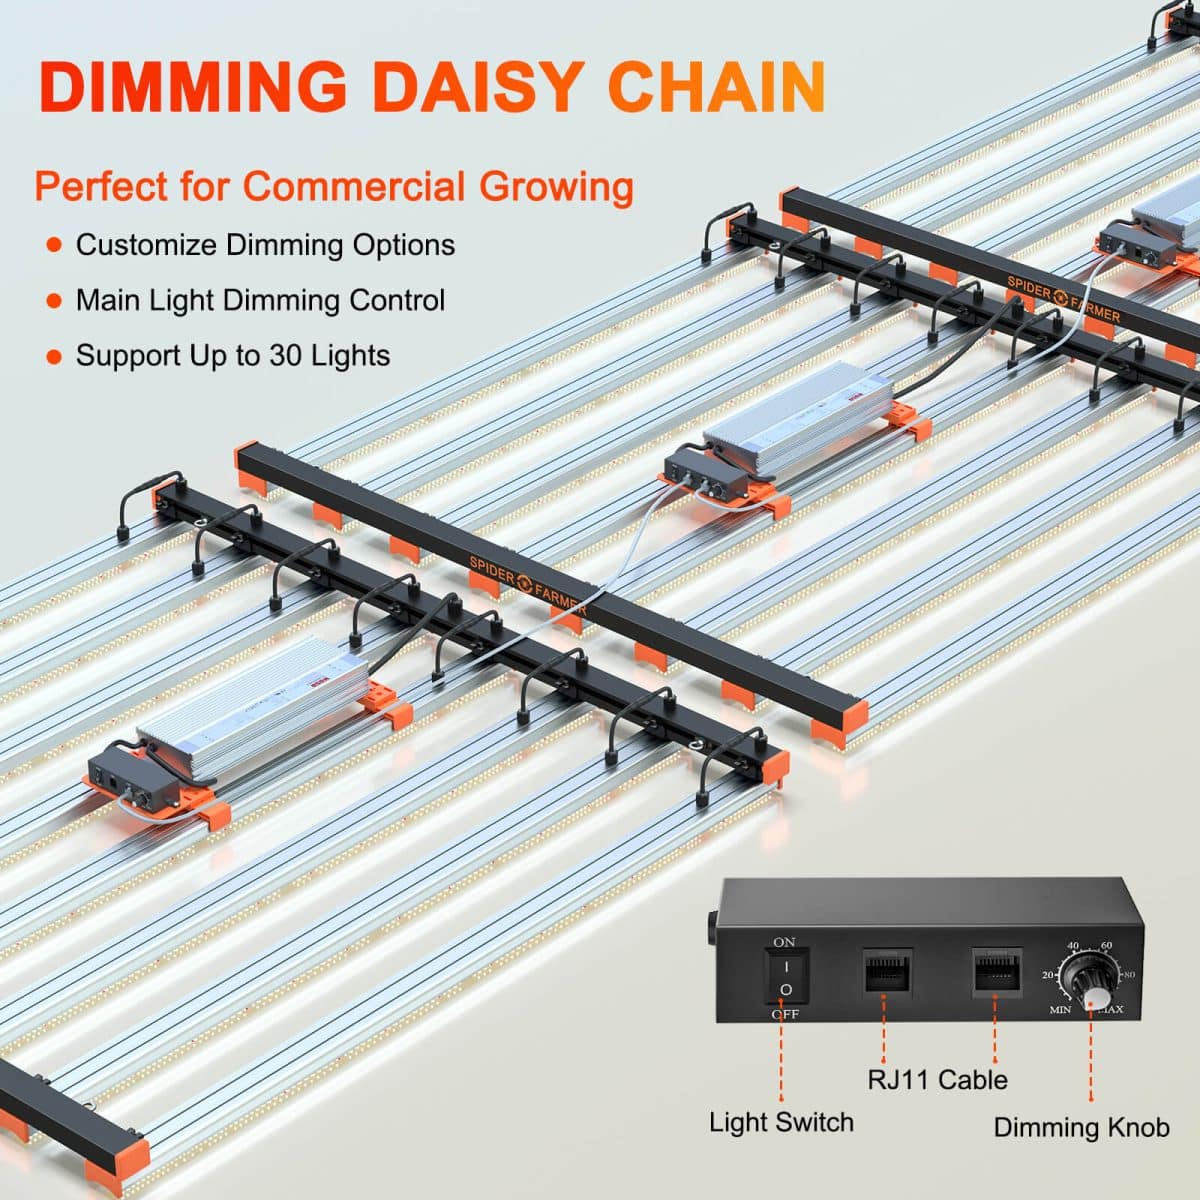 SE7000-Dimming daisy chain function